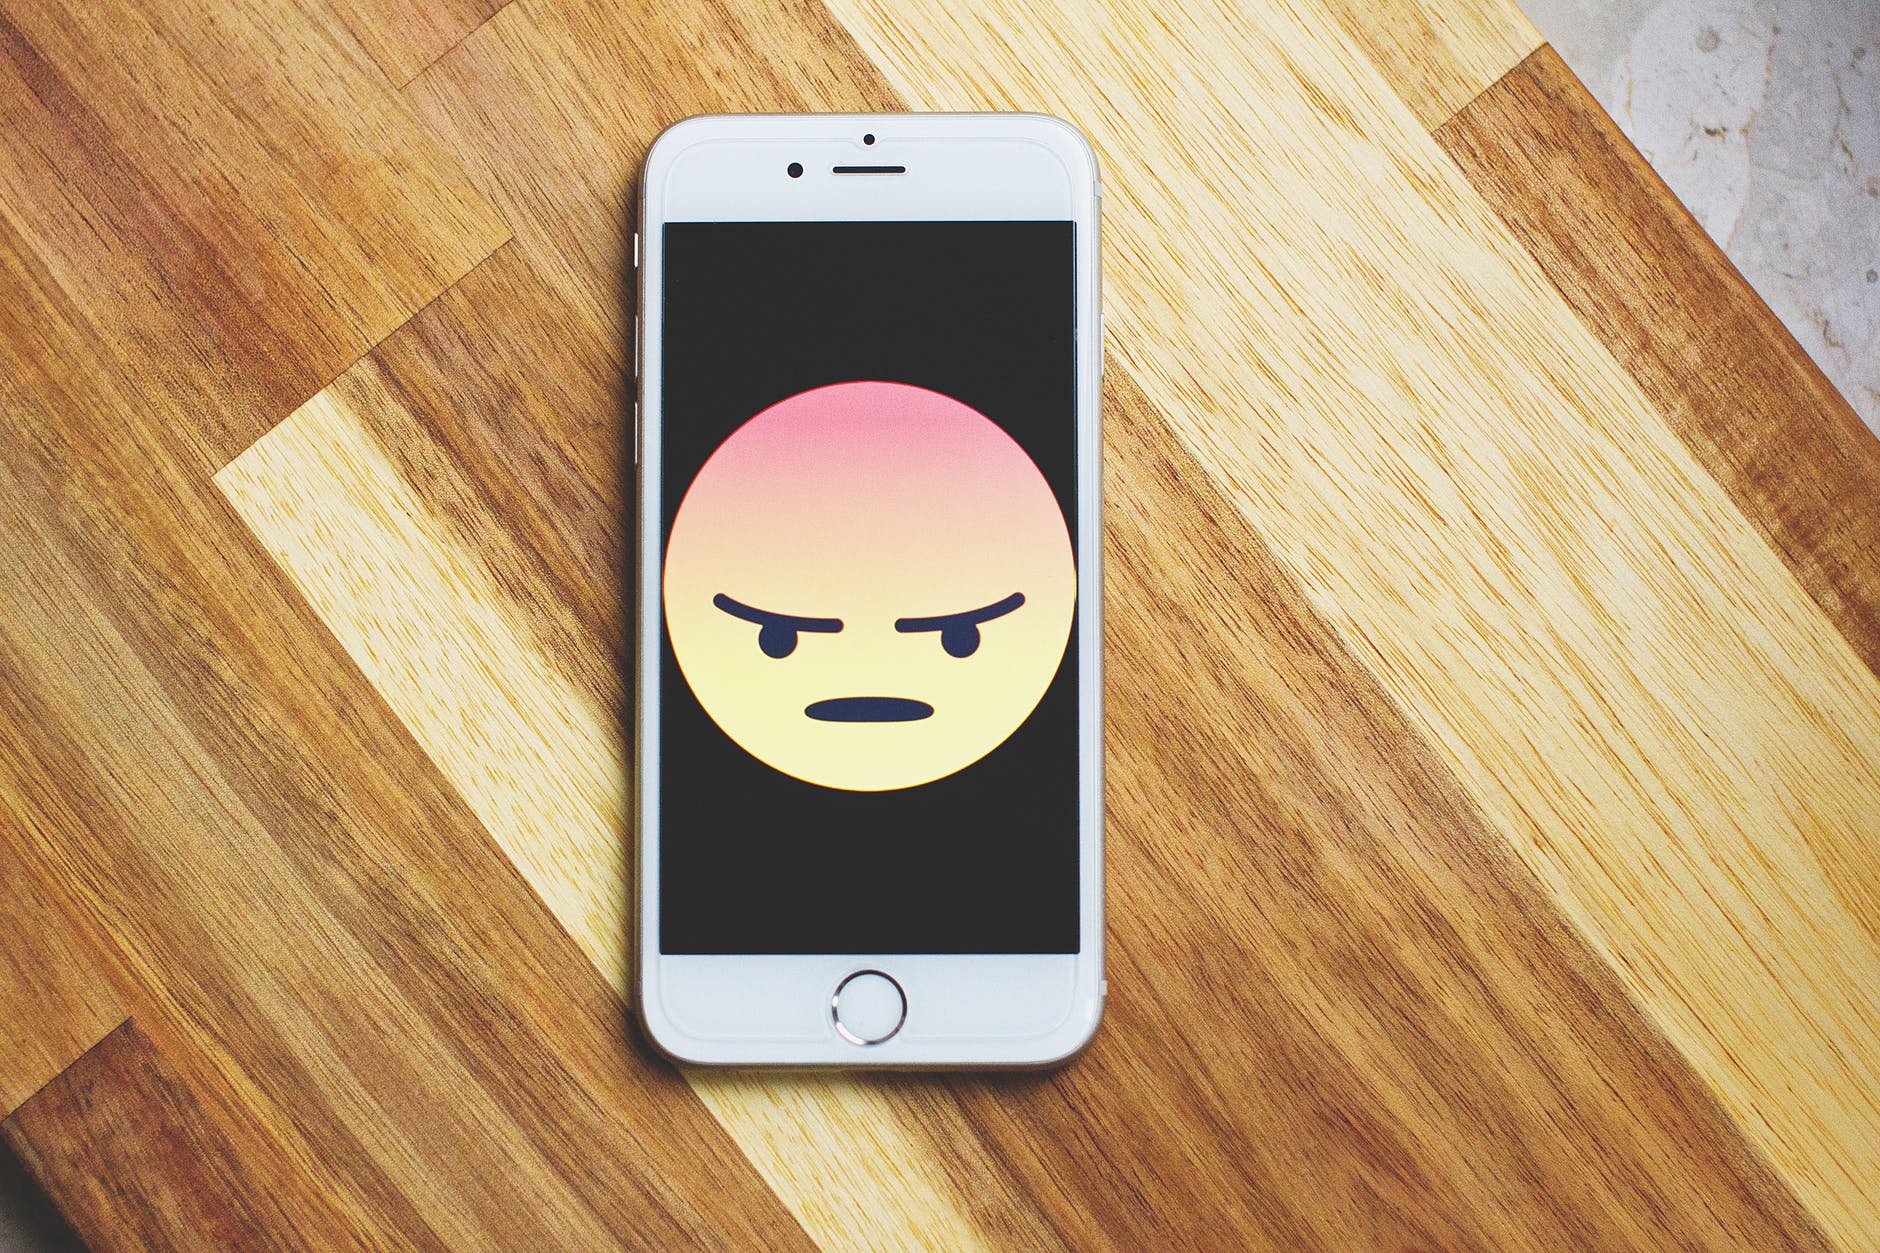 Smartphone with angry face emoji on the screen